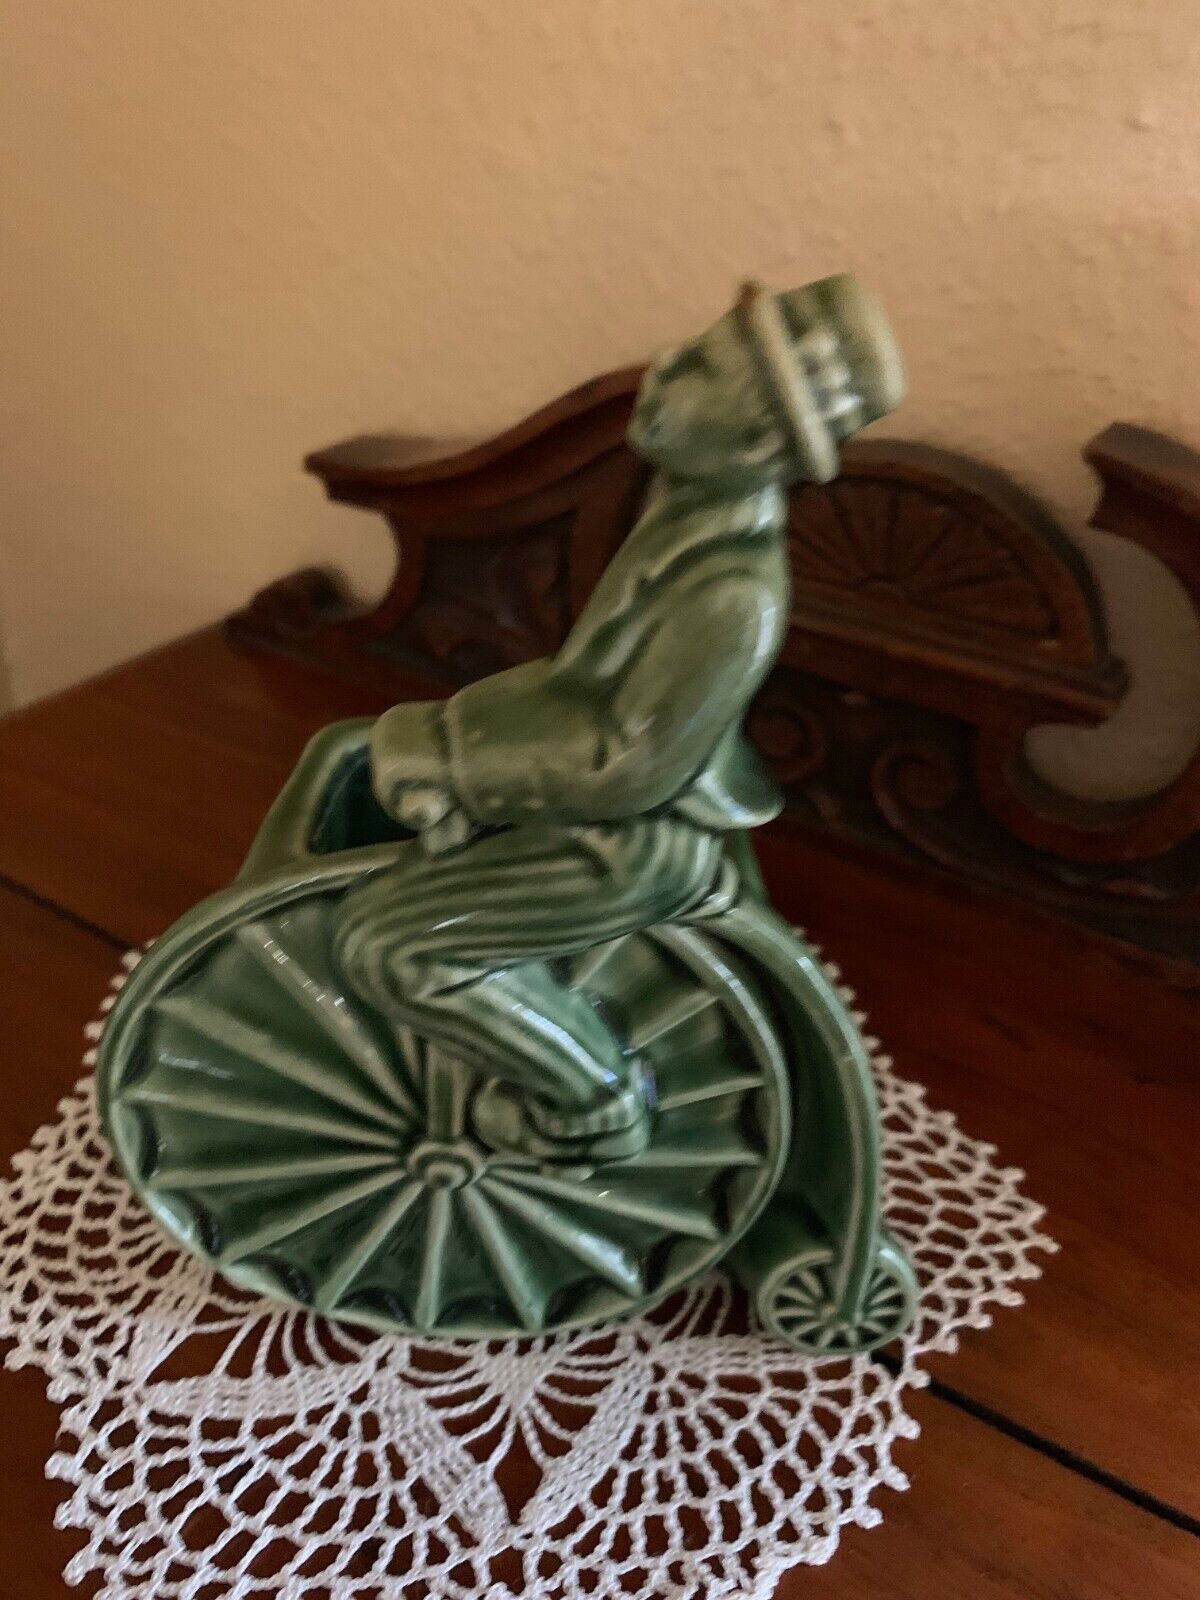 Vintage Ceramic Green Planter Man Riding a Penny Farthing Bicycle Unique